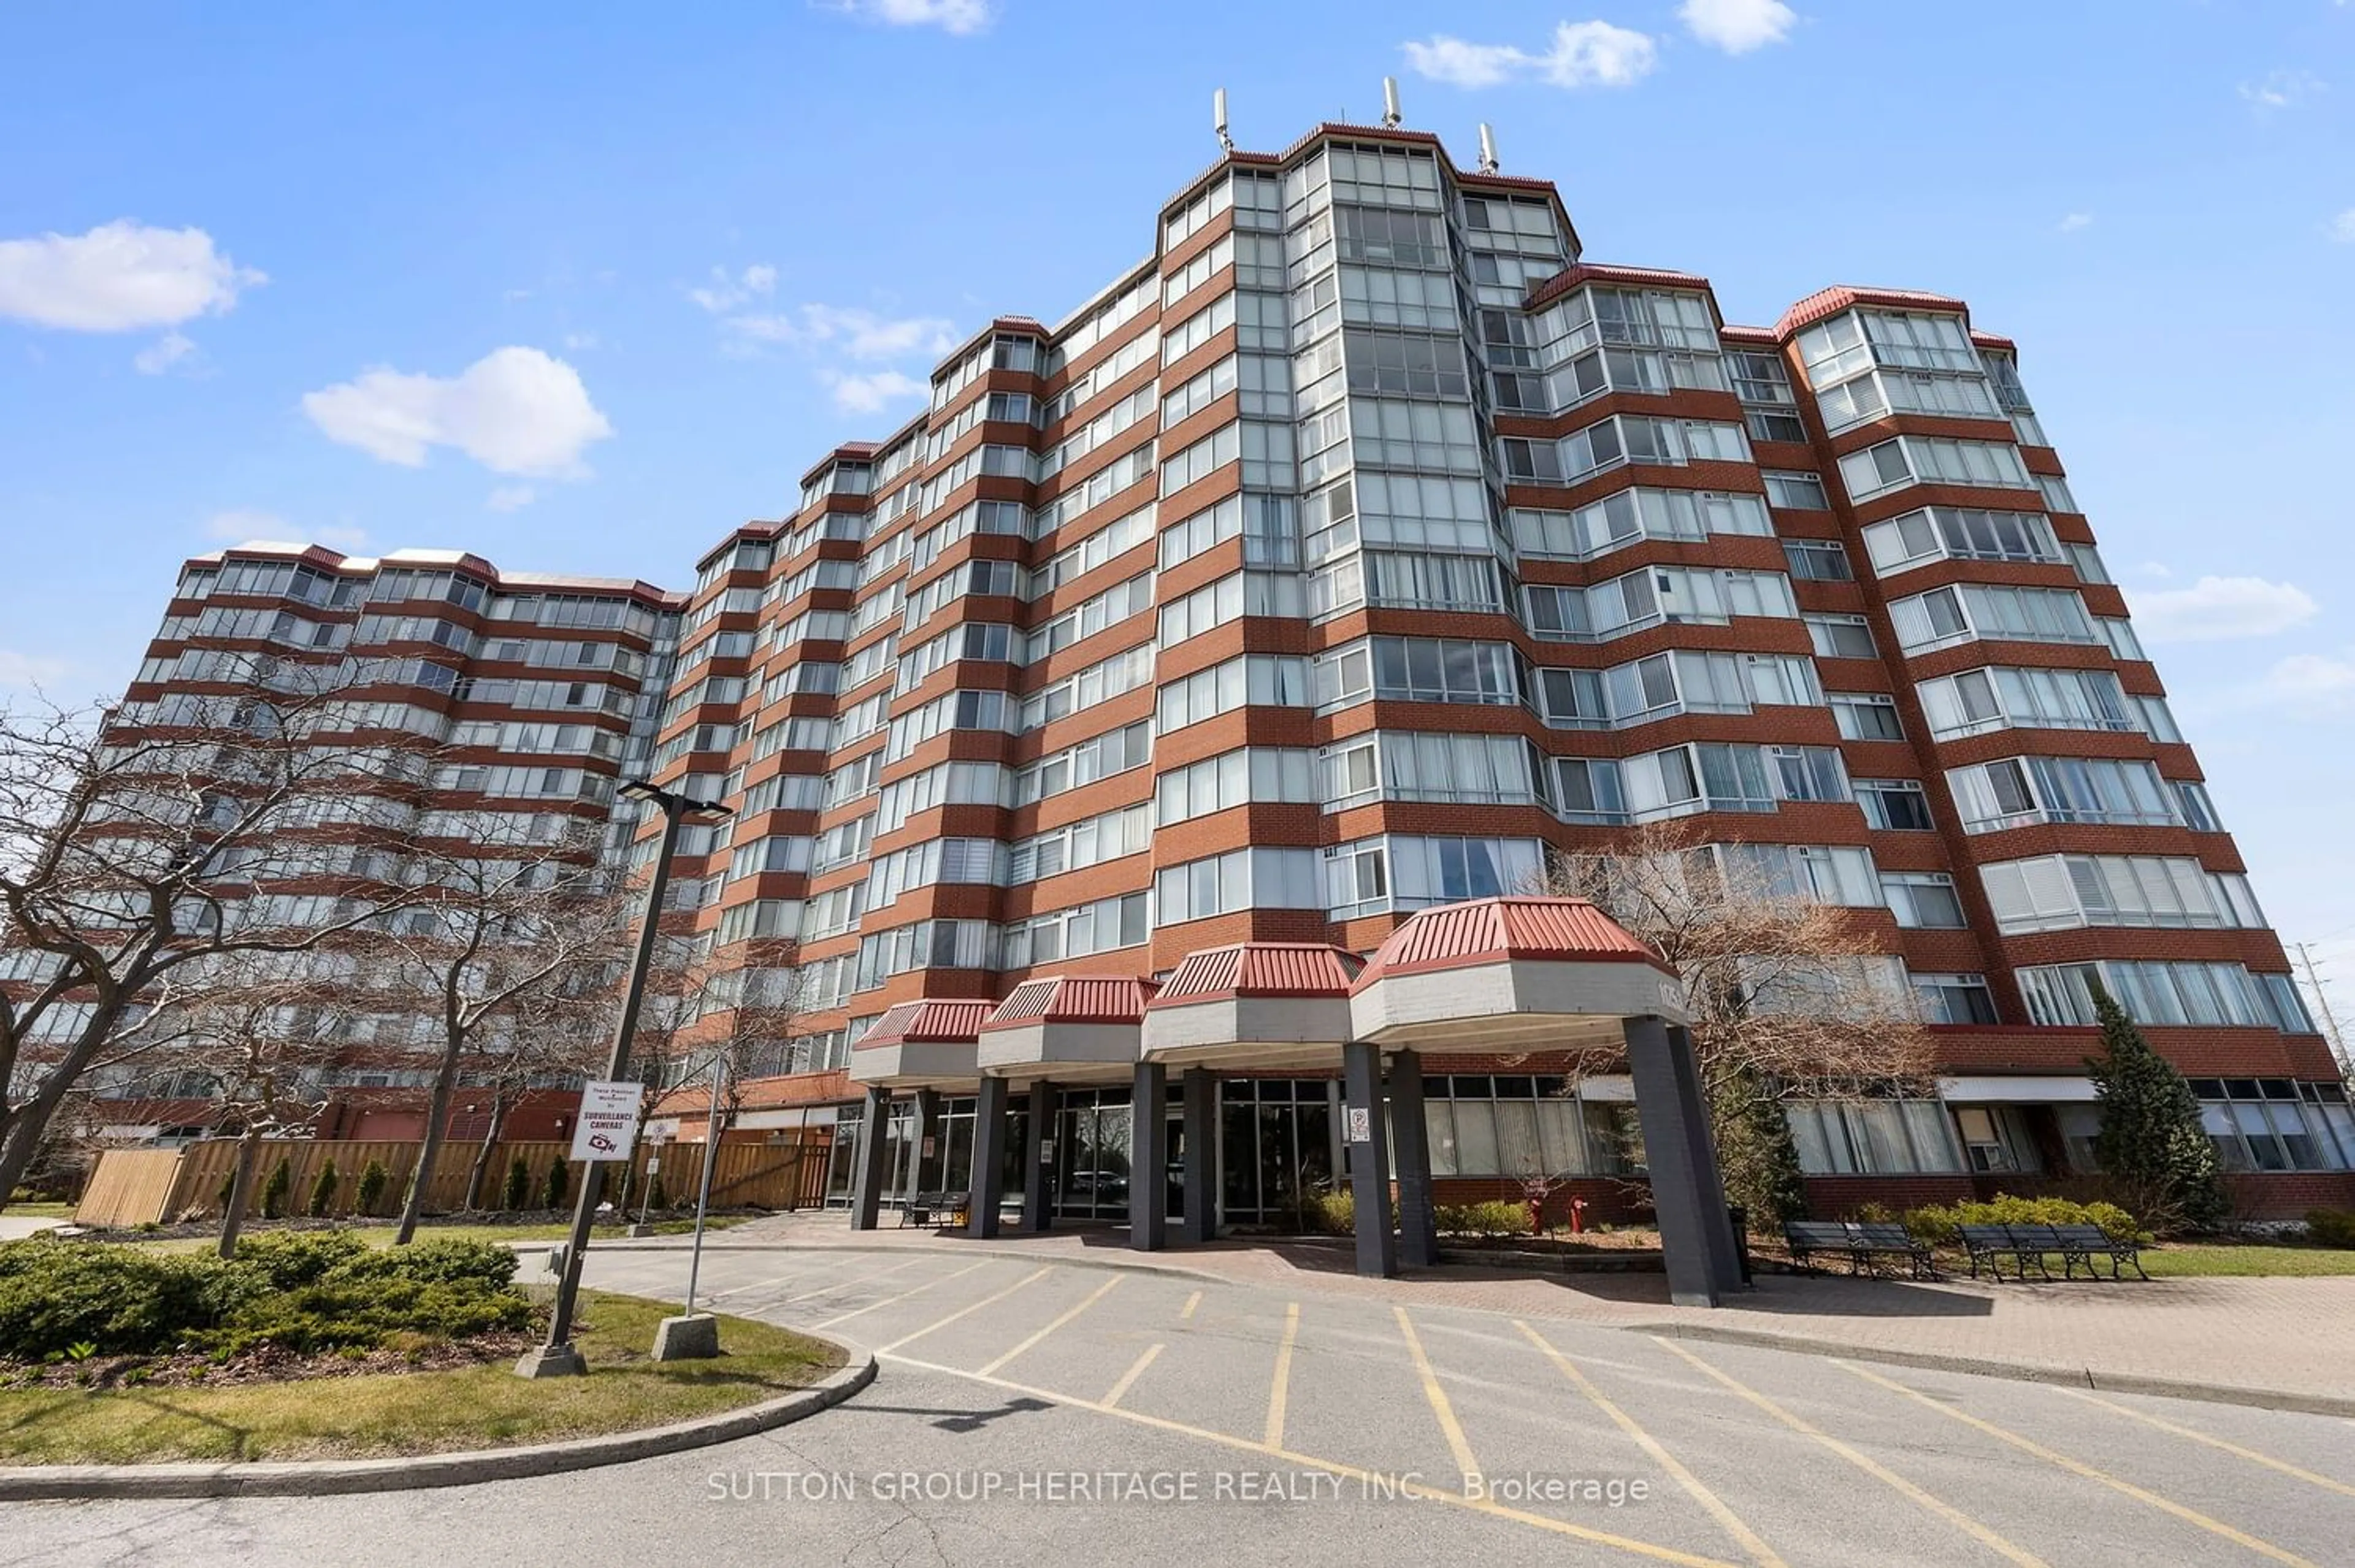 A pic from exterior of the house or condo for 11753 Sheppard Ave #1111, Toronto Ontario M1B 5M3